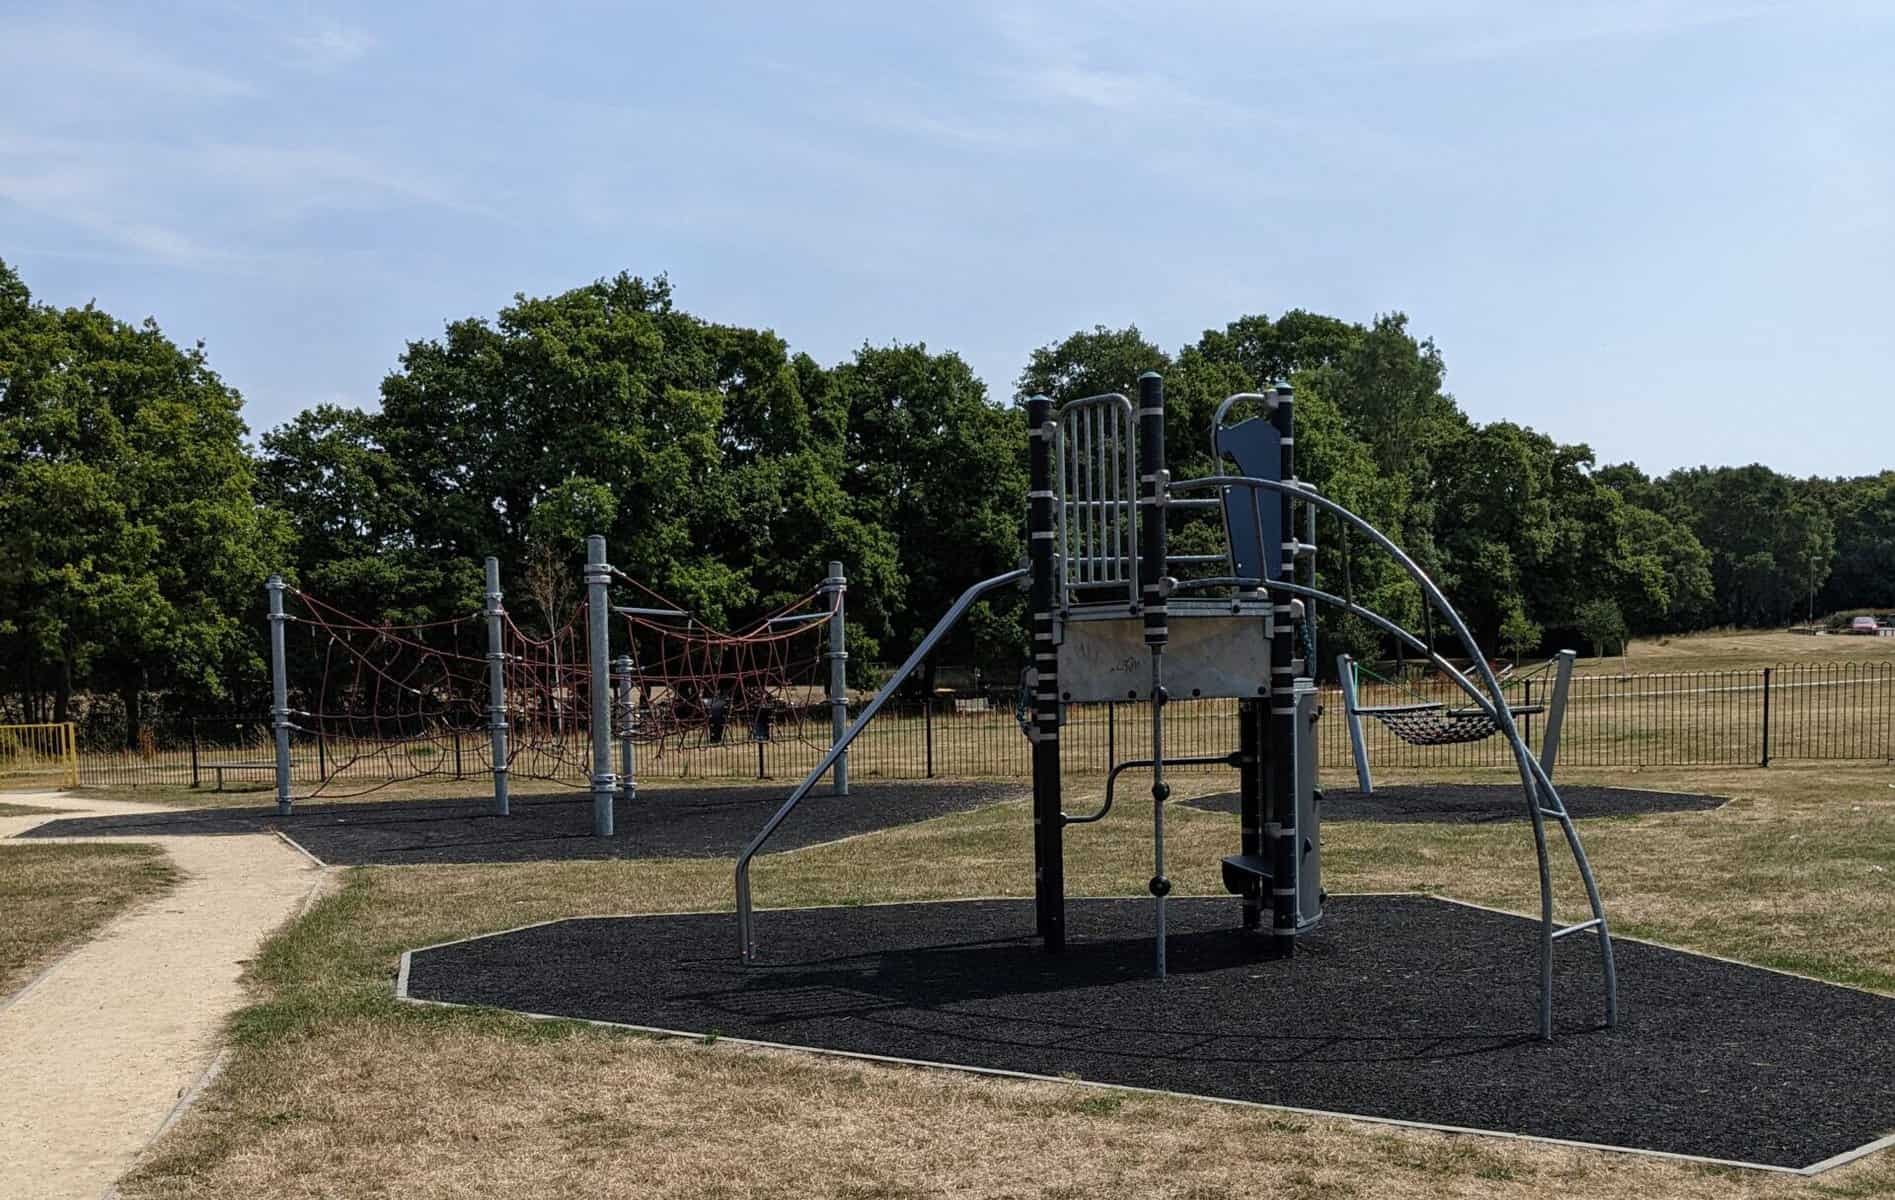 Orchard Play Park